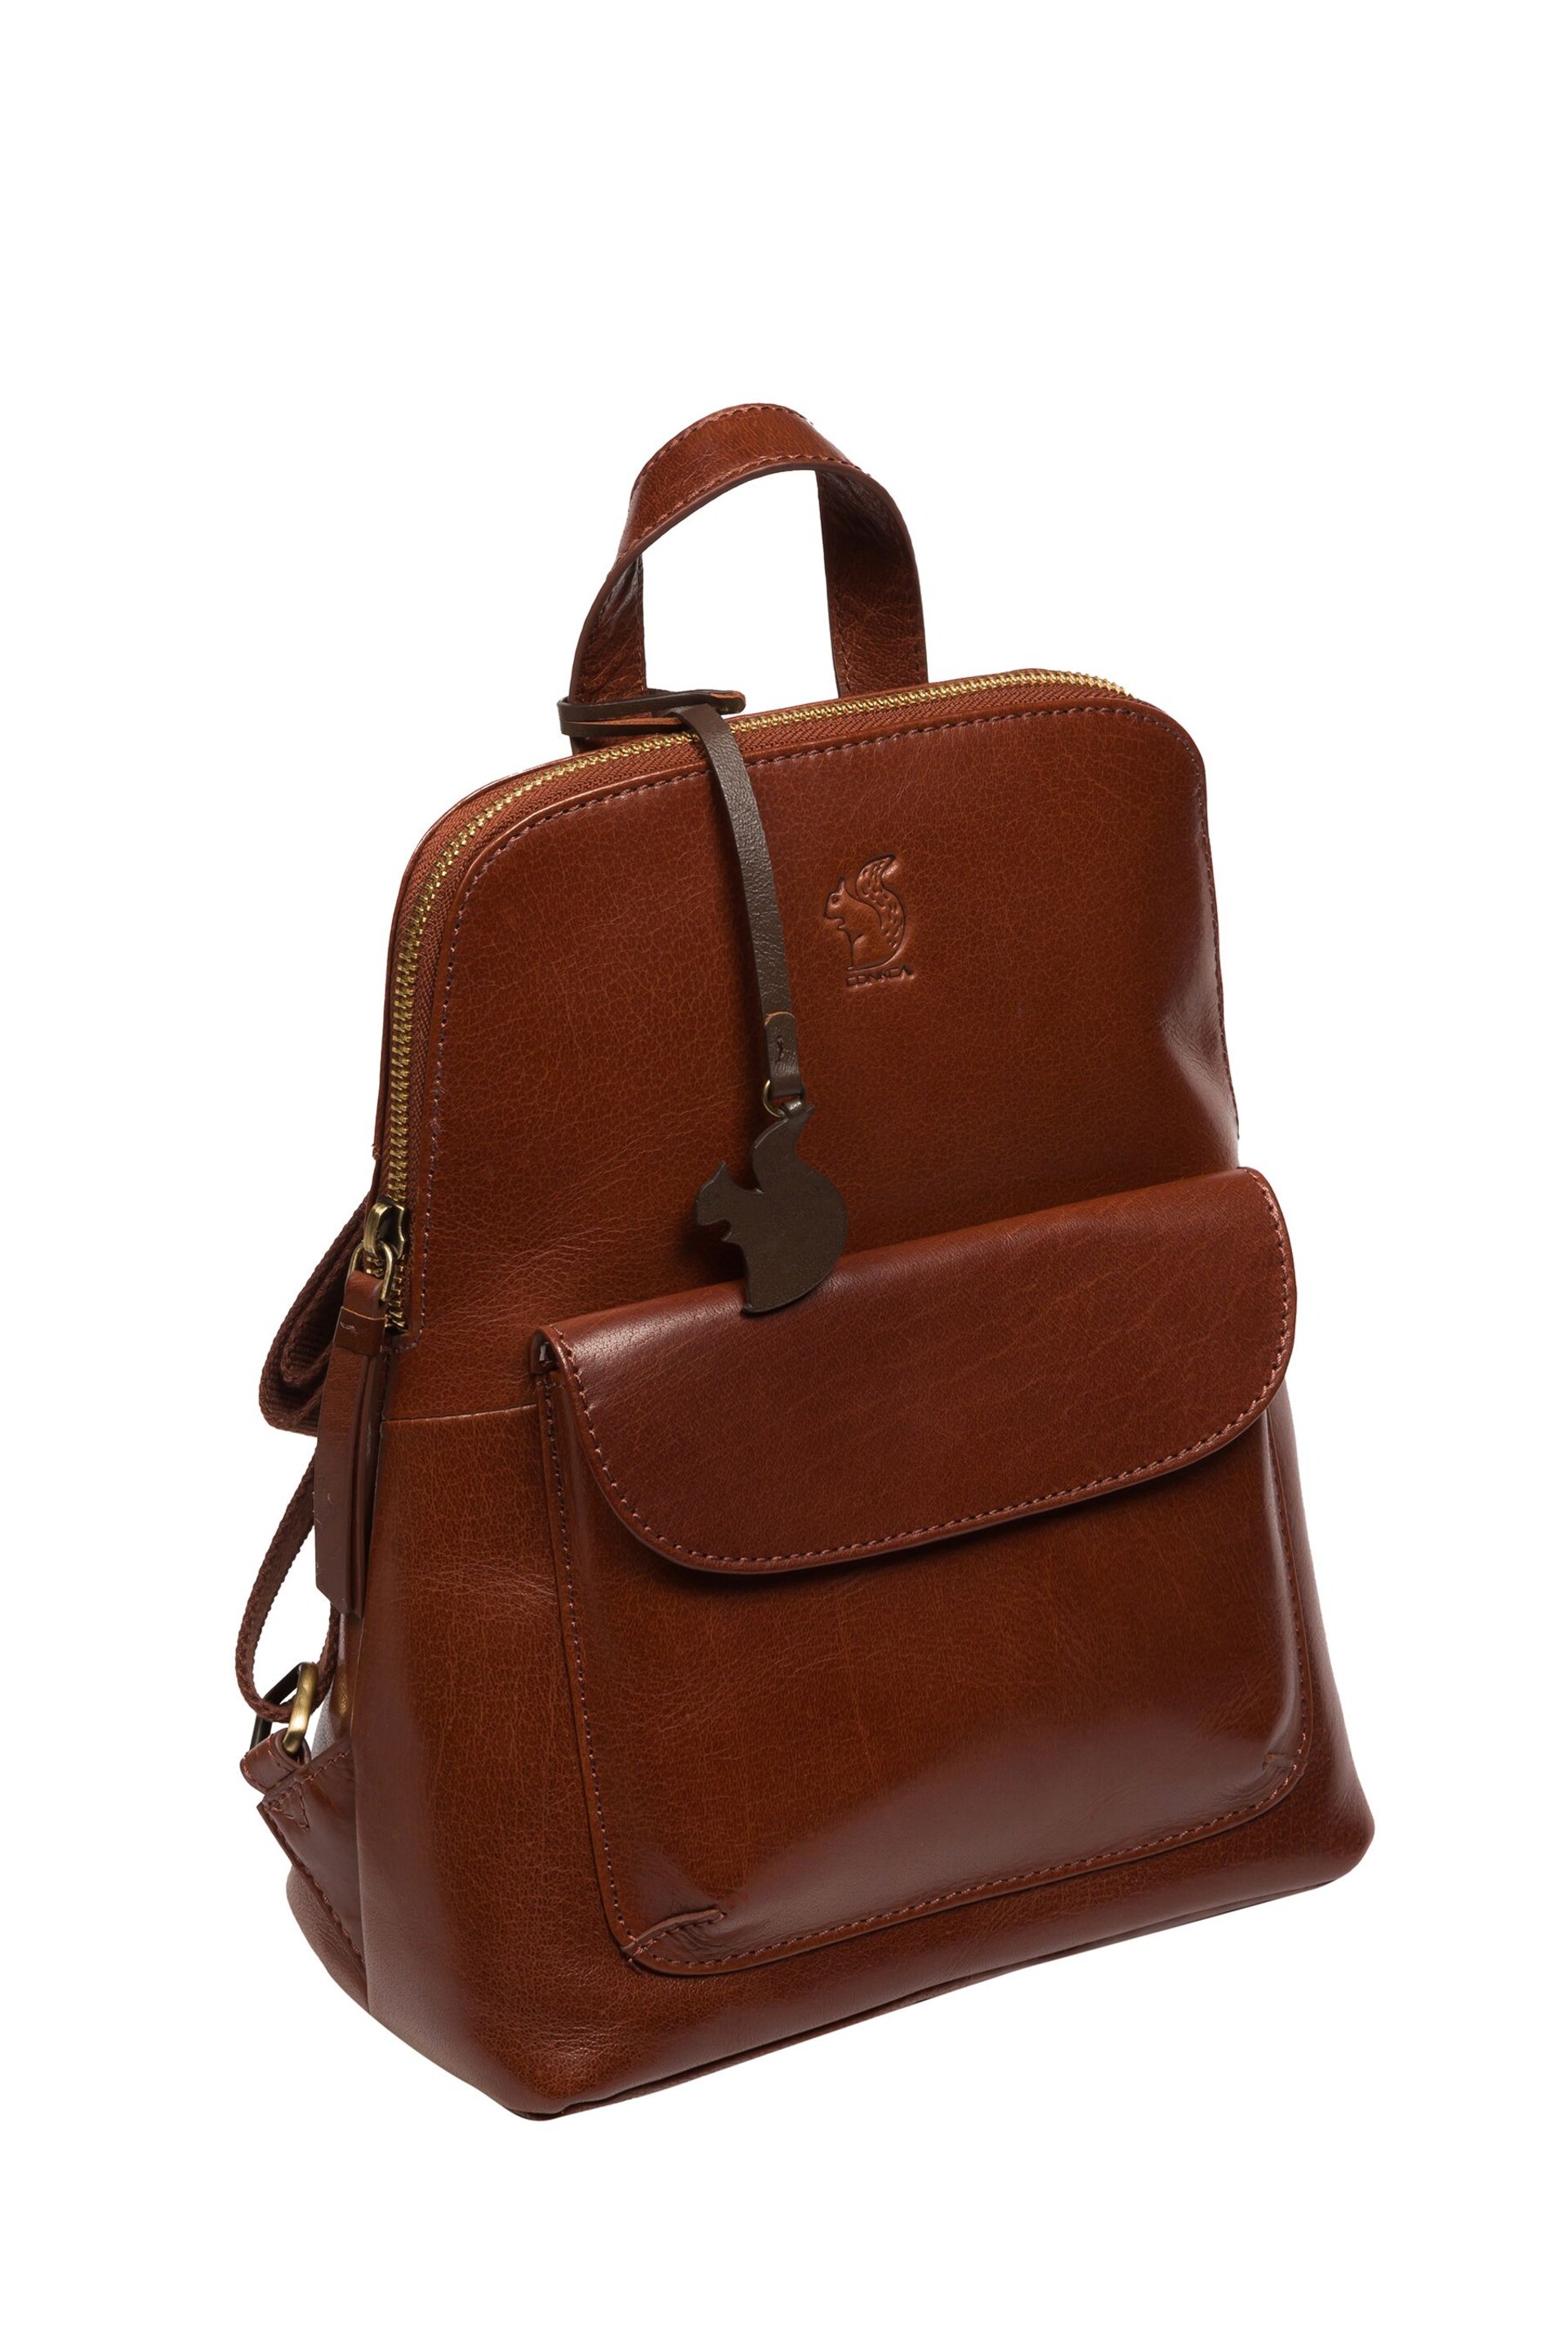 Conkca 'Kerrie' Leather Backpack - Image 6 of 7